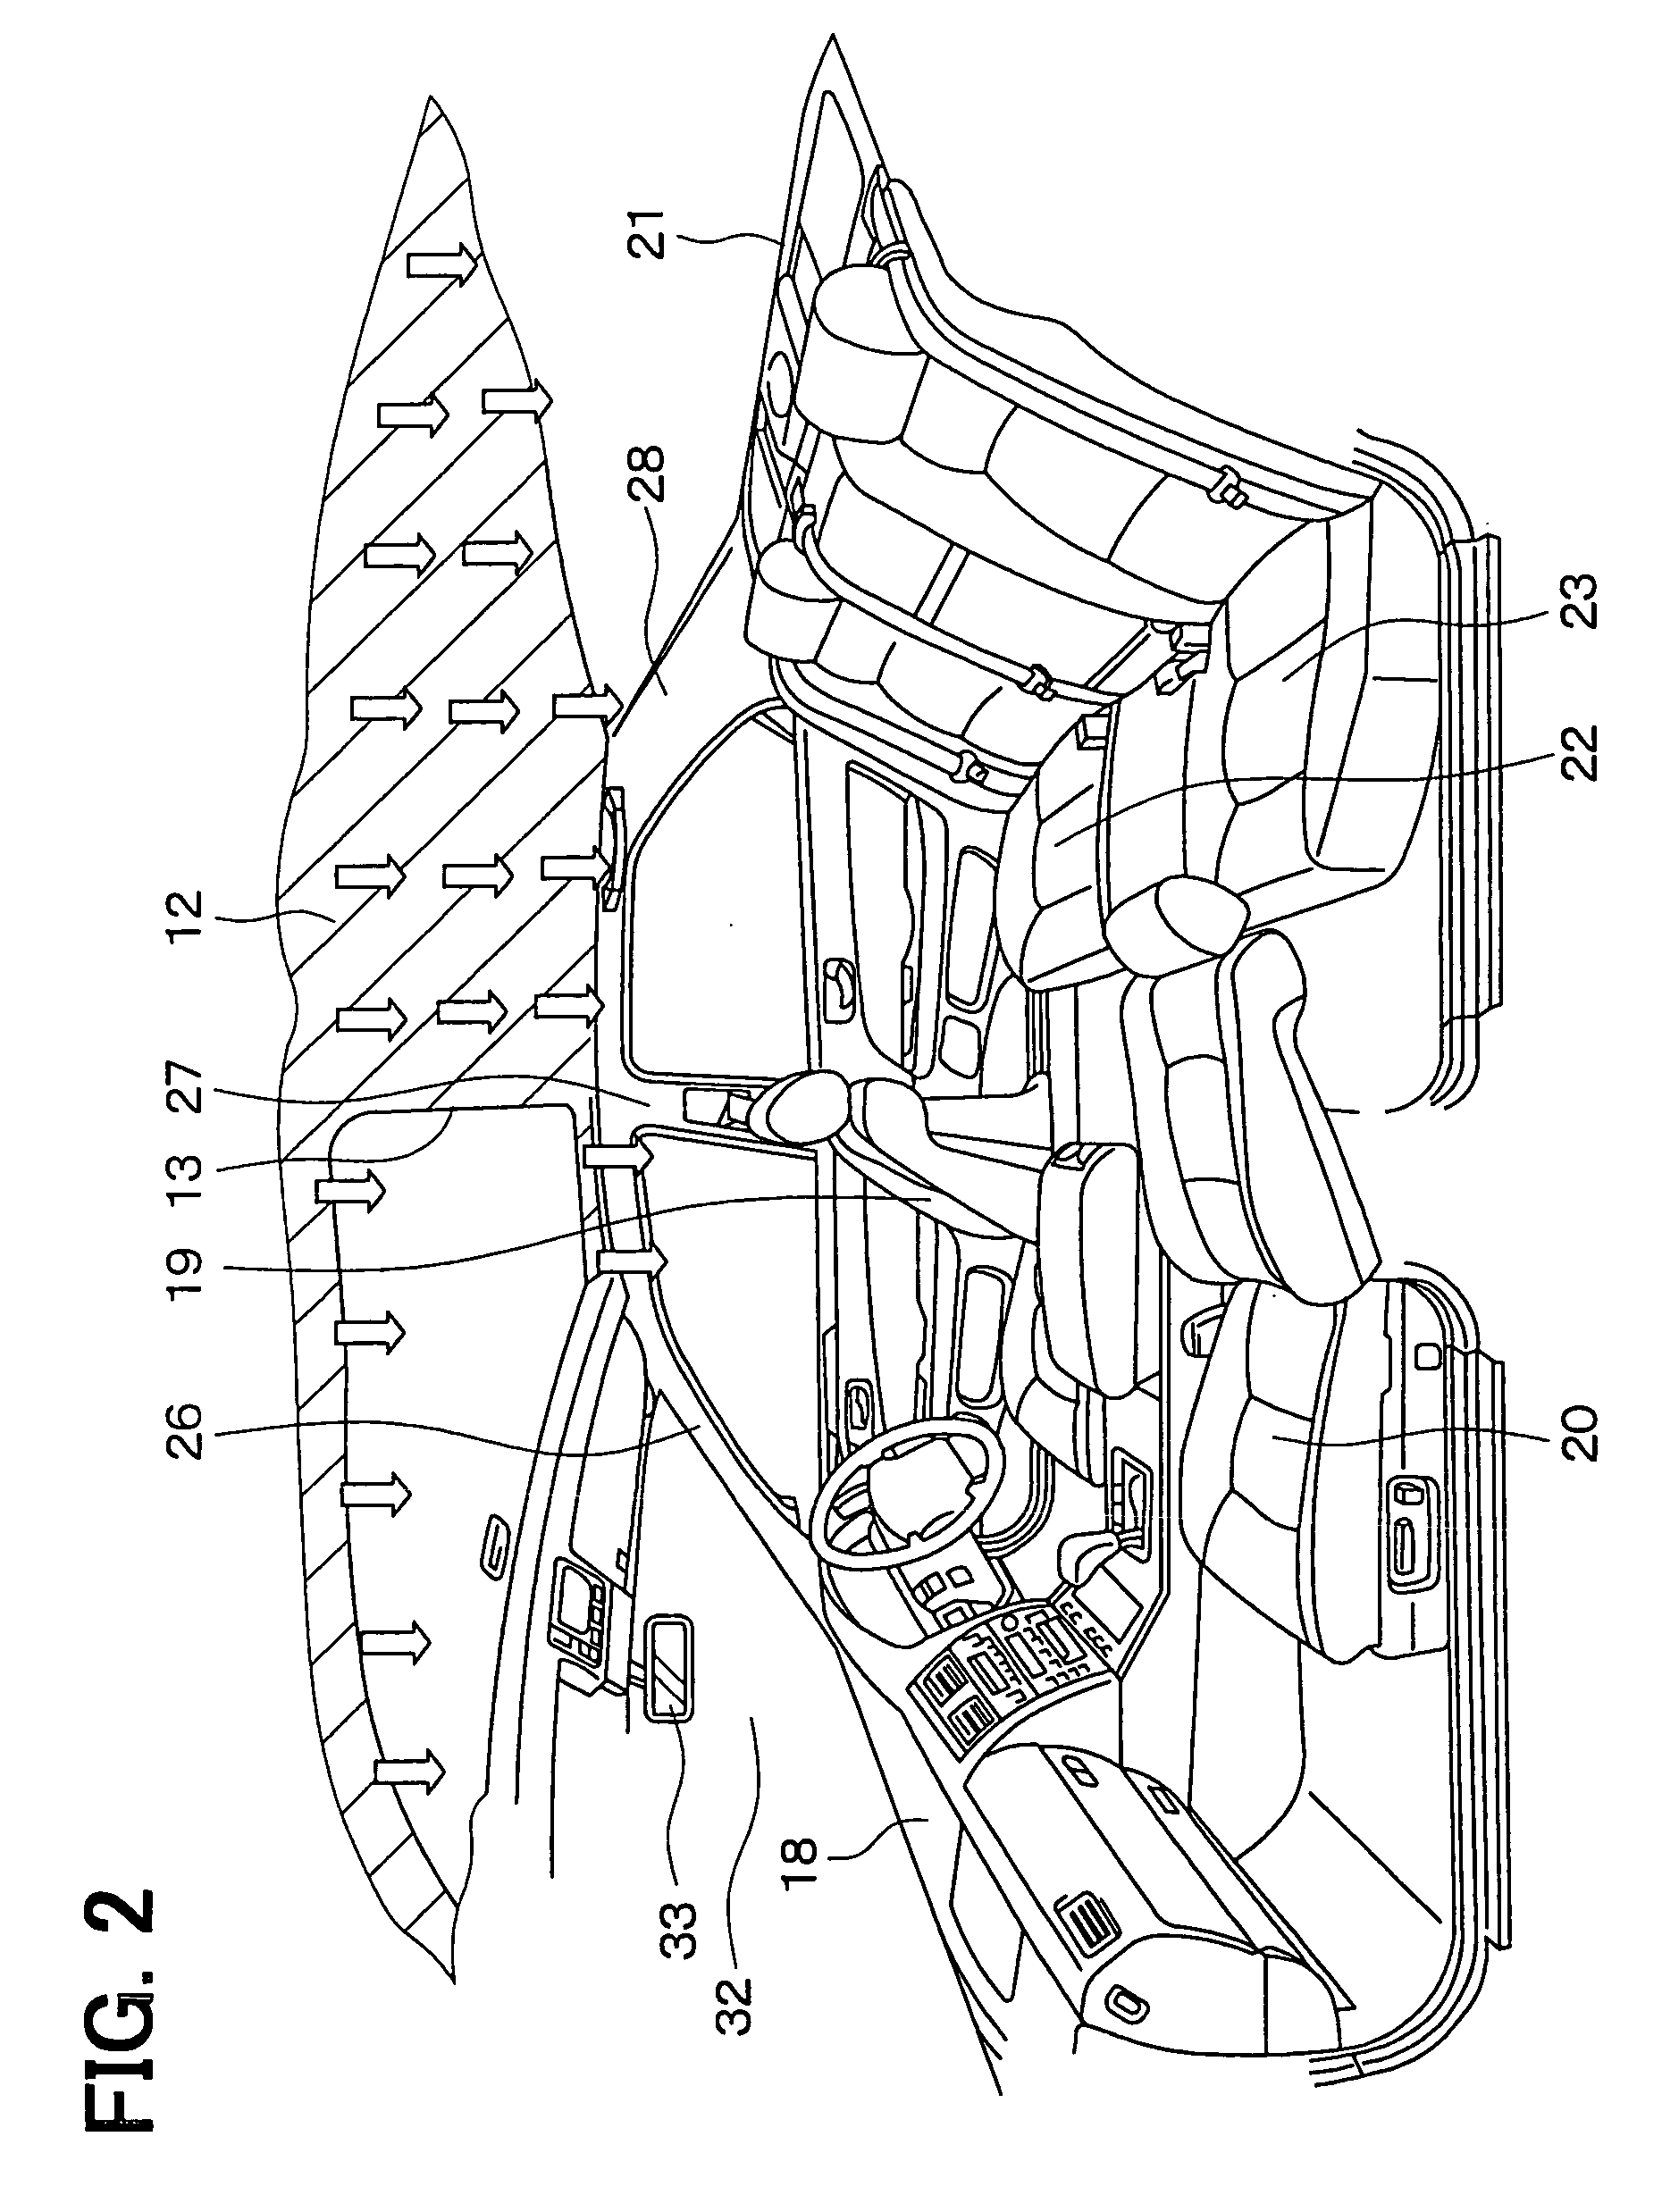 Ceiling air passage system for vehicle air conditioner